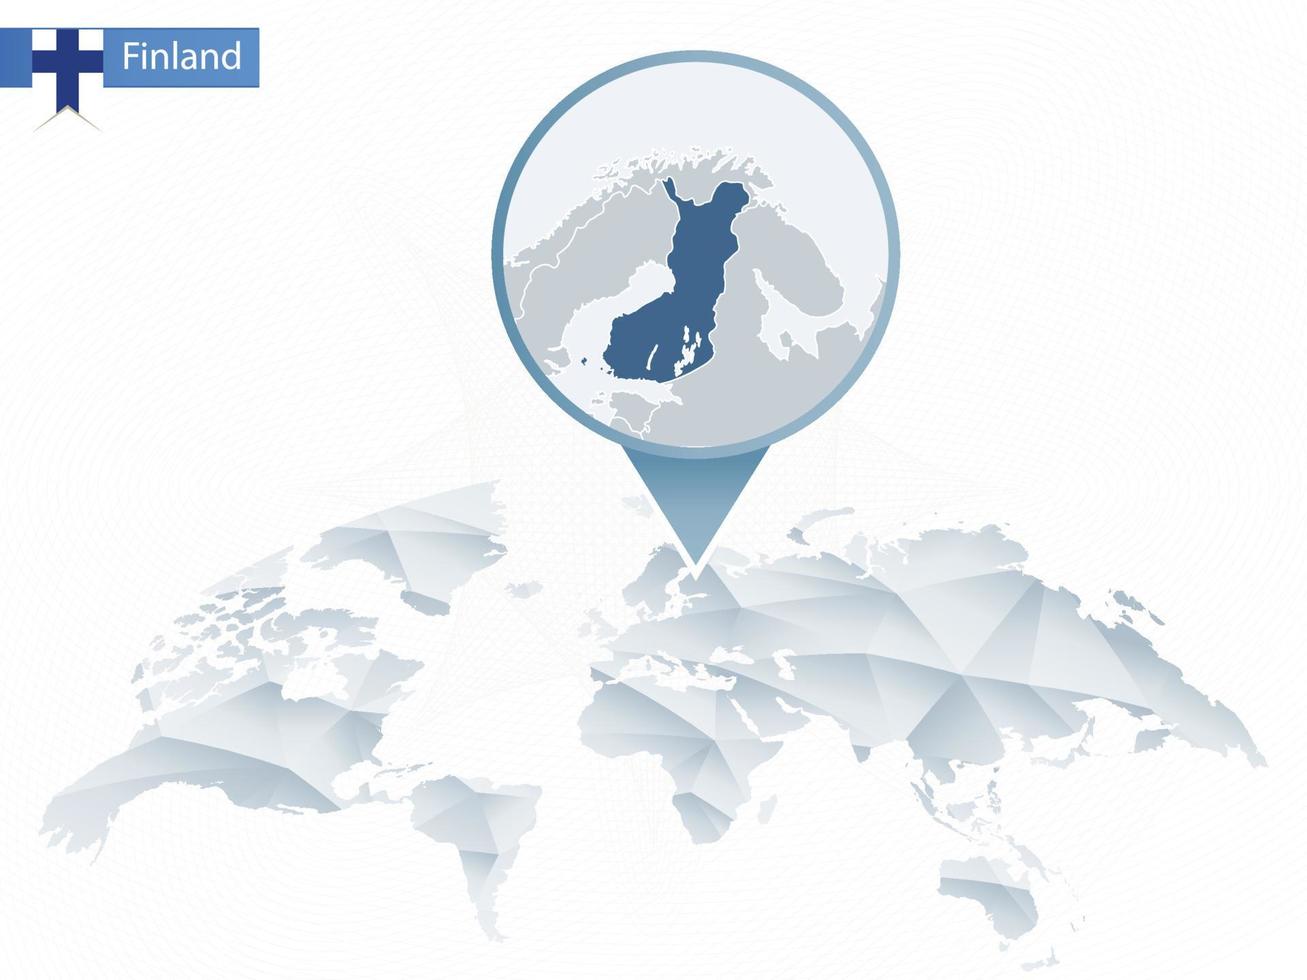 Abstract rounded World Map with pinned detailed Finland map. vector